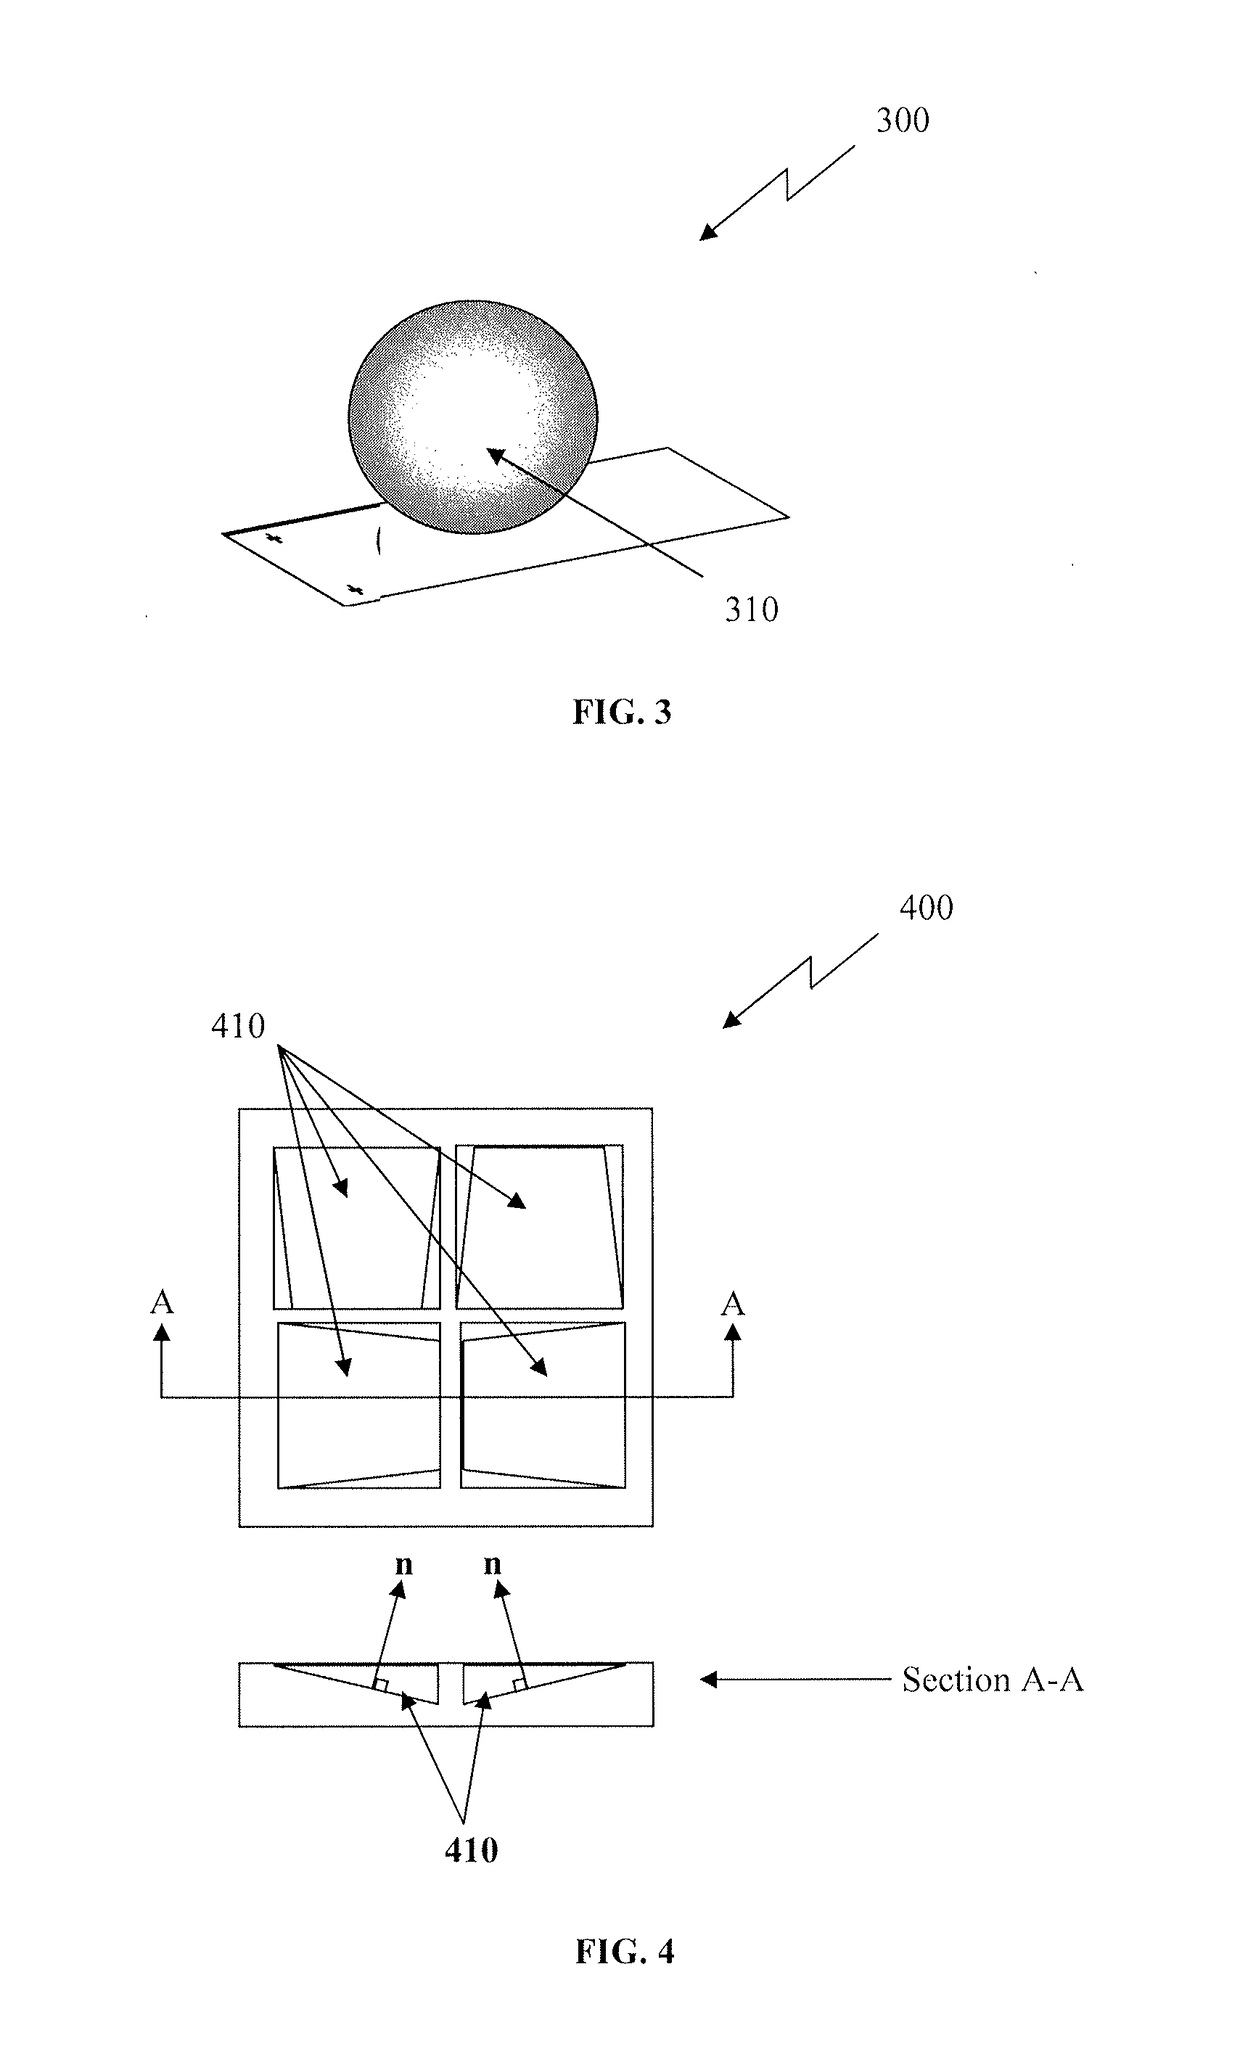 Imaging apparatus, systems and methods